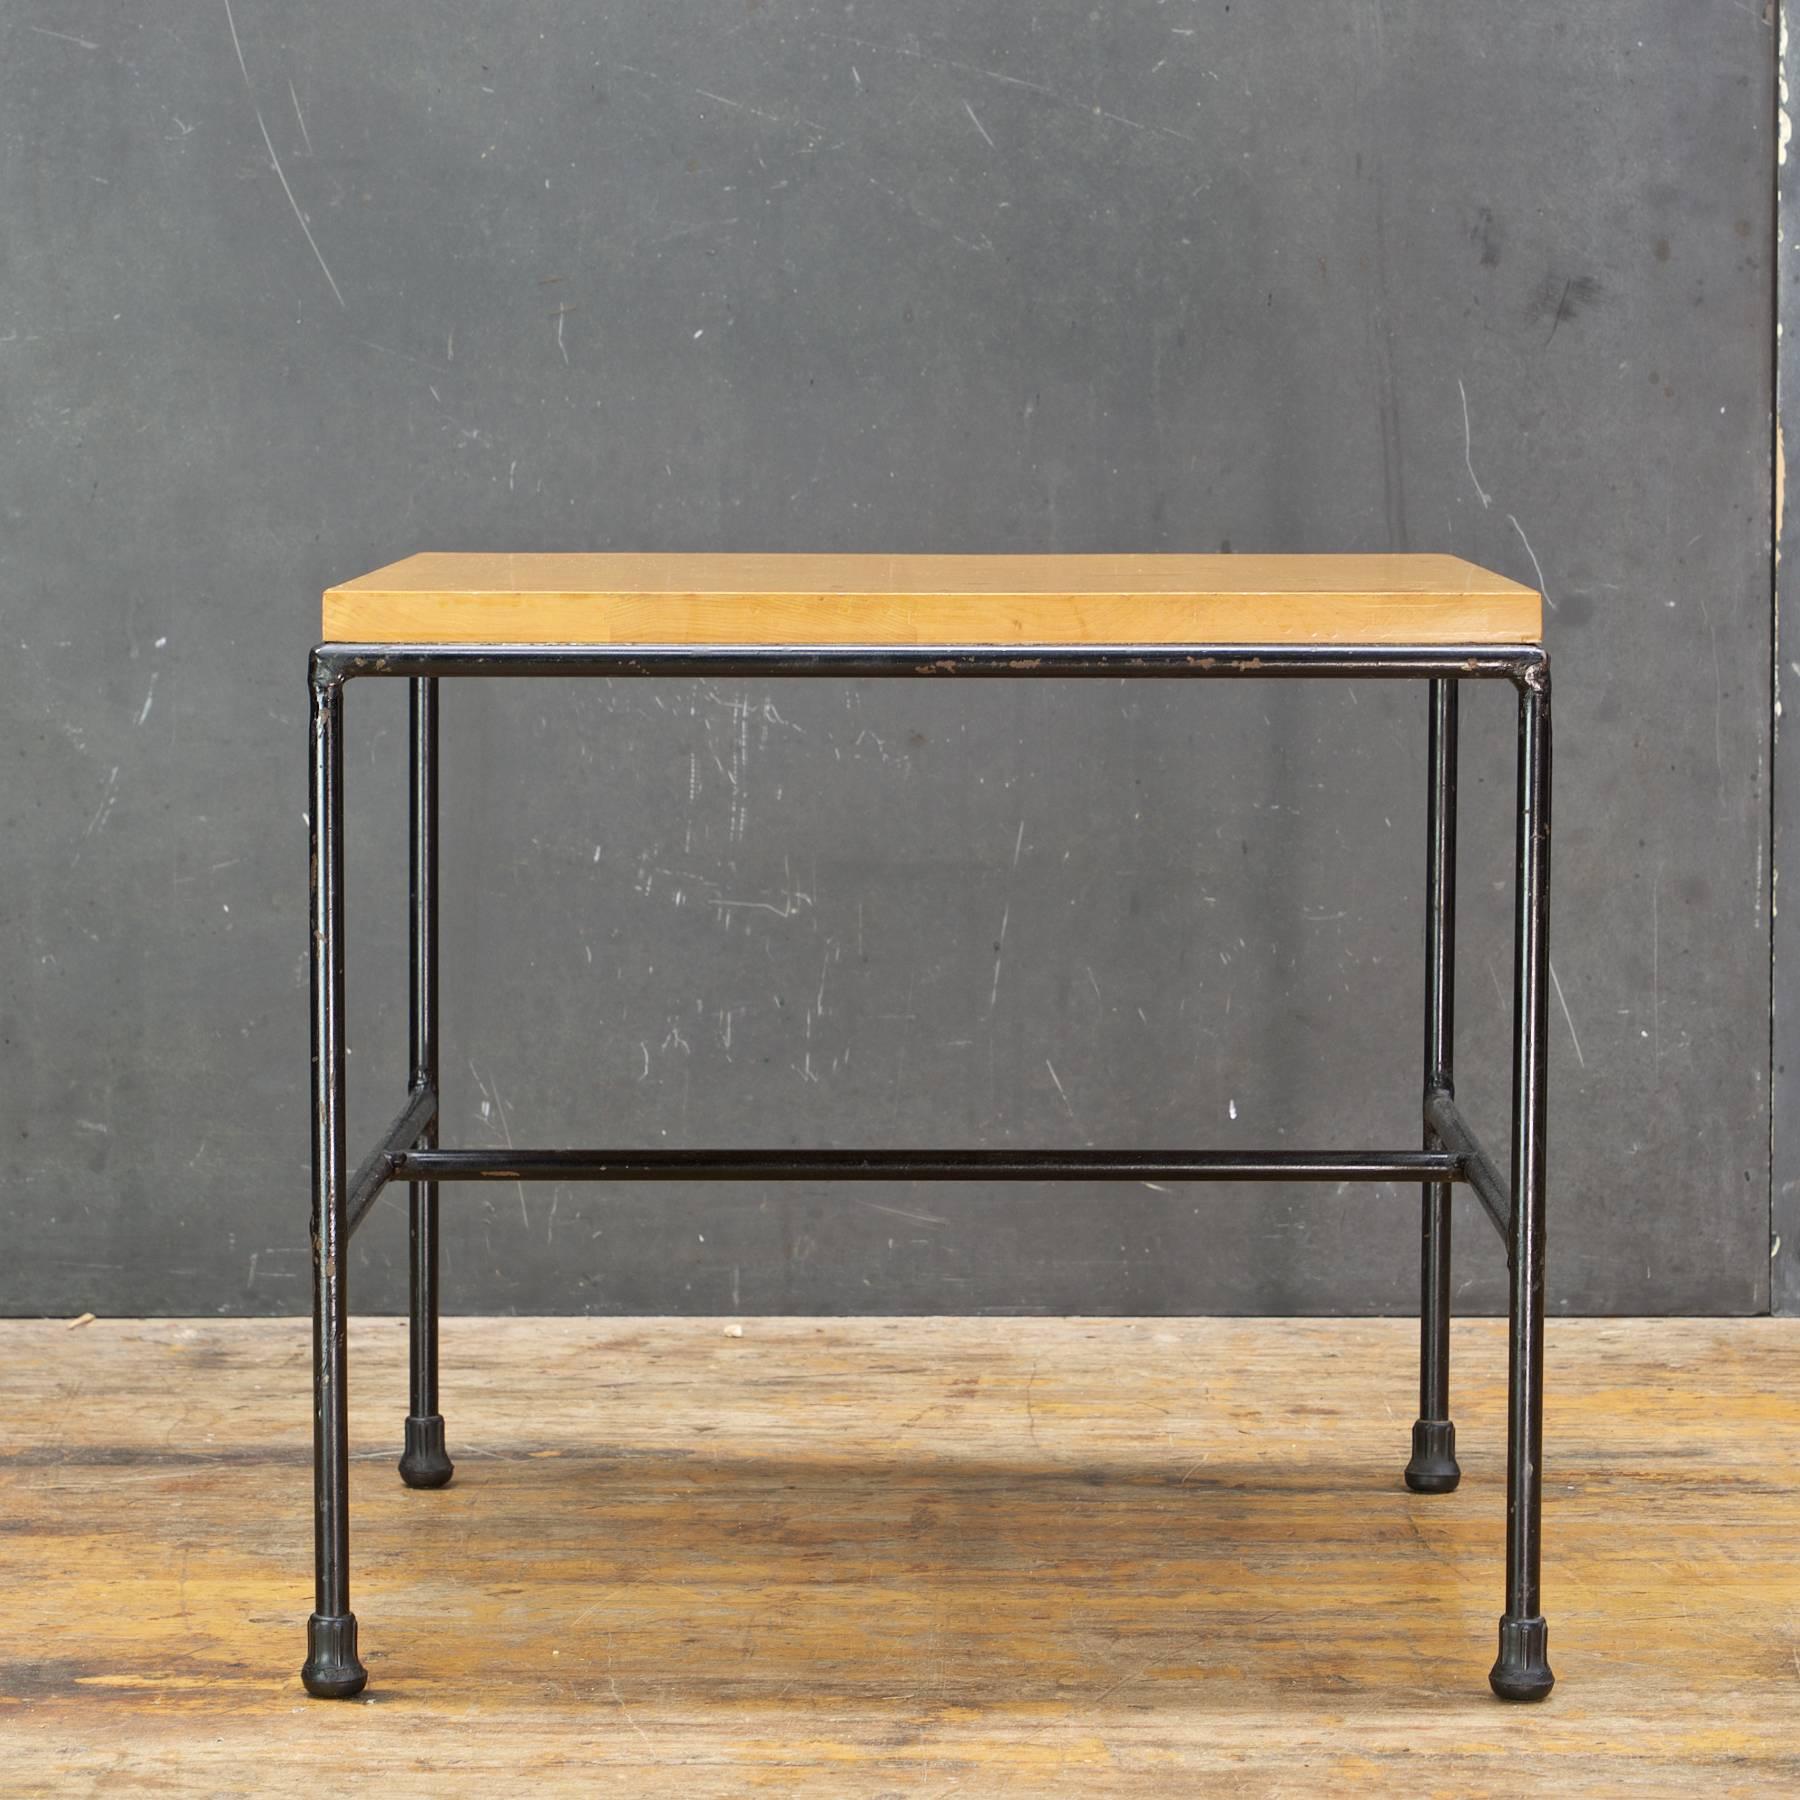 The early 1950s lesser seen end table model from the Planner Group furniture line. Beautiful in function through minimal cost-effective materials.